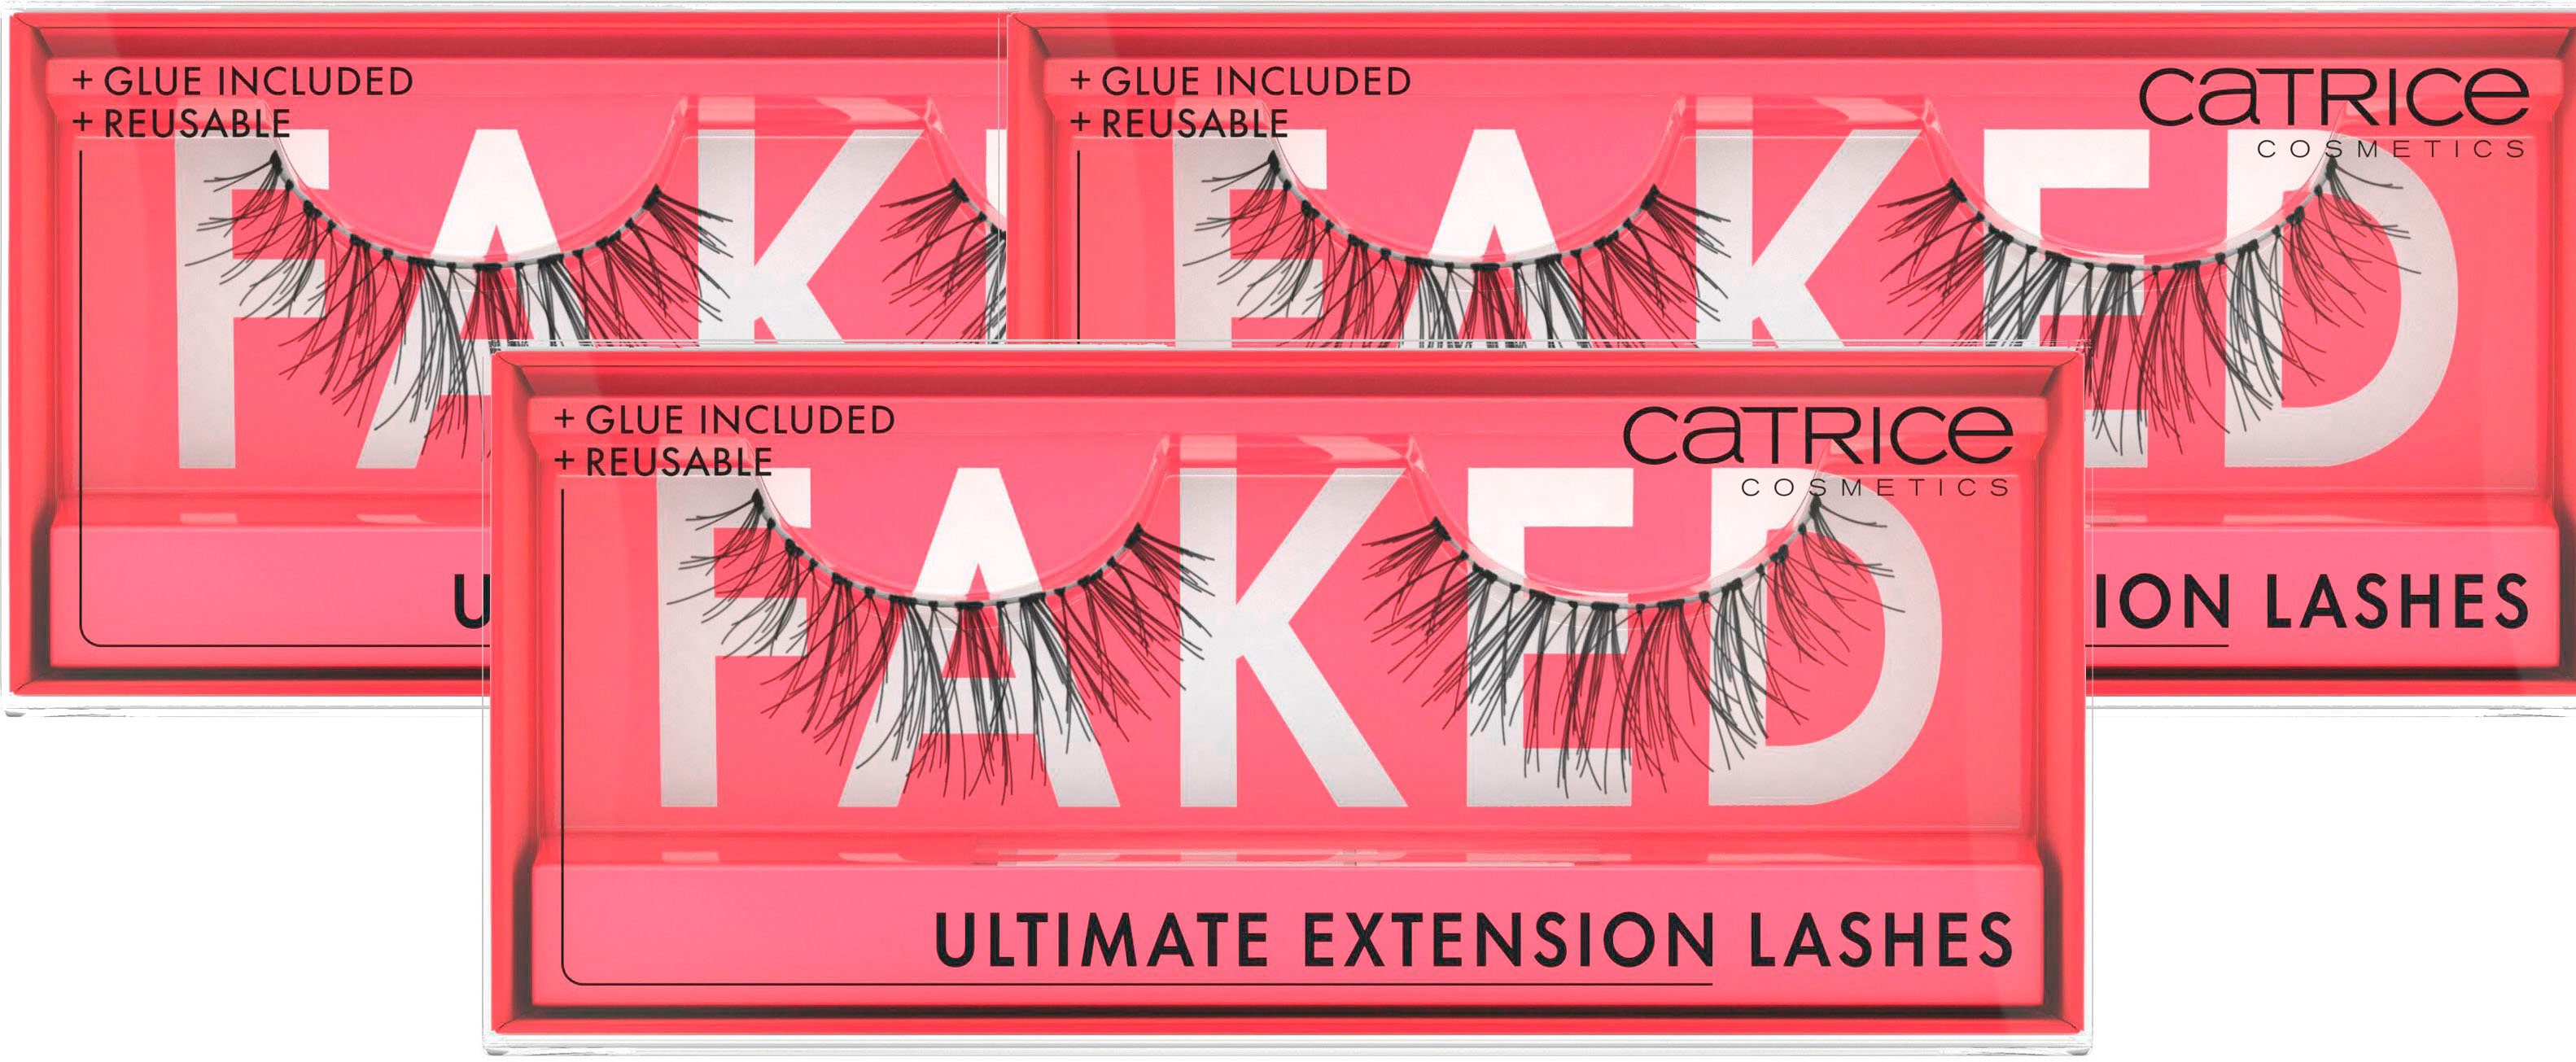 Catrice Bandwimpern Faked Ultimate Extension Lashes, Set, 3 tlg.